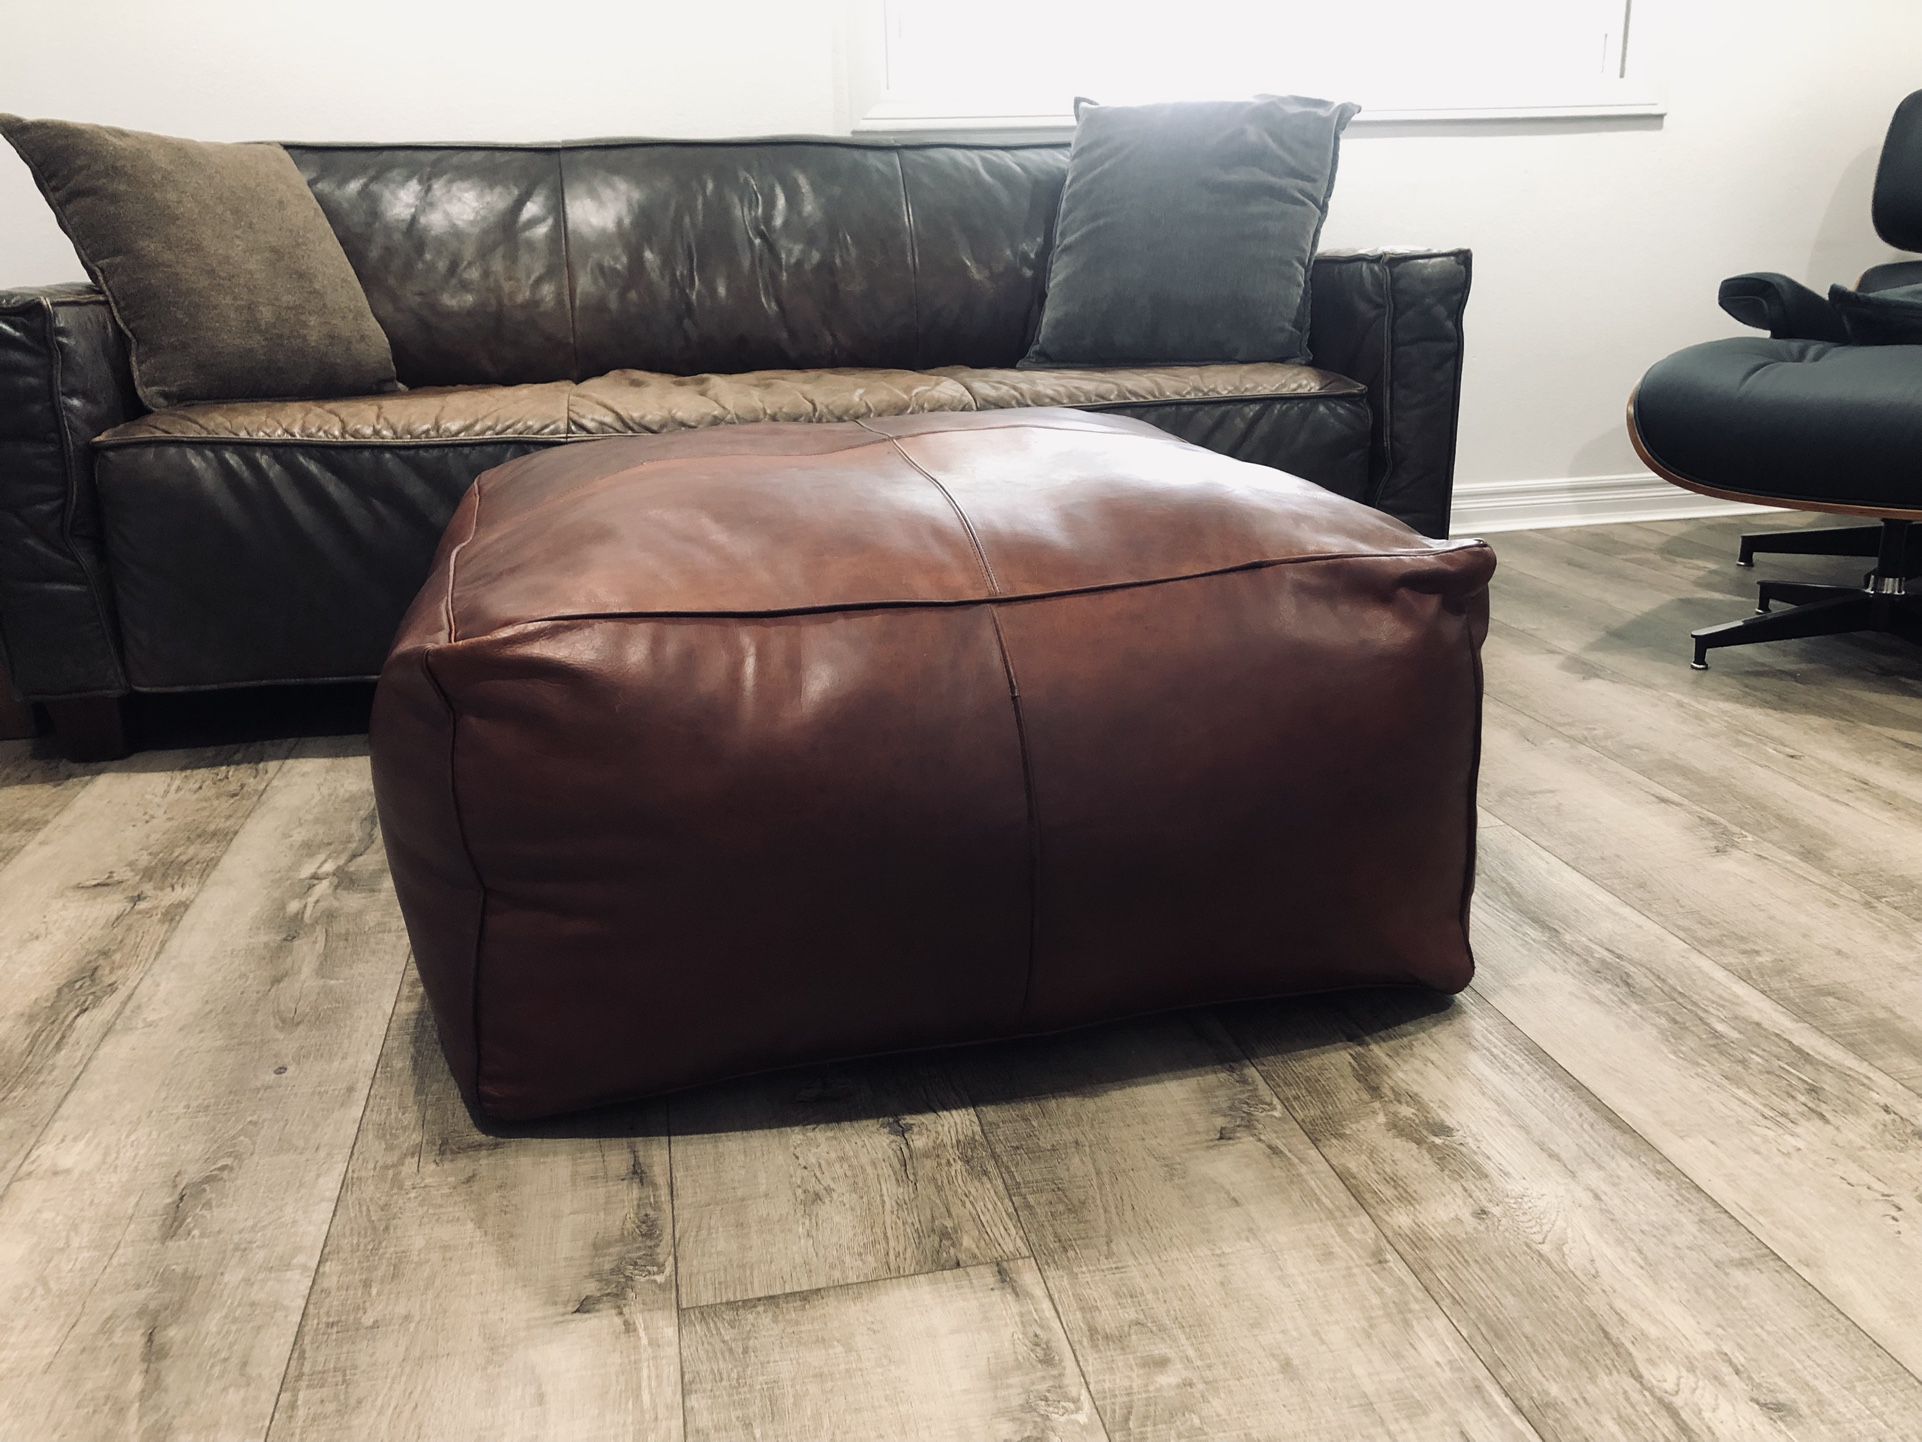 Large Ottoman, Dark Brown Genuine Leather, 36" x 36" x 16".  In Great Condition.